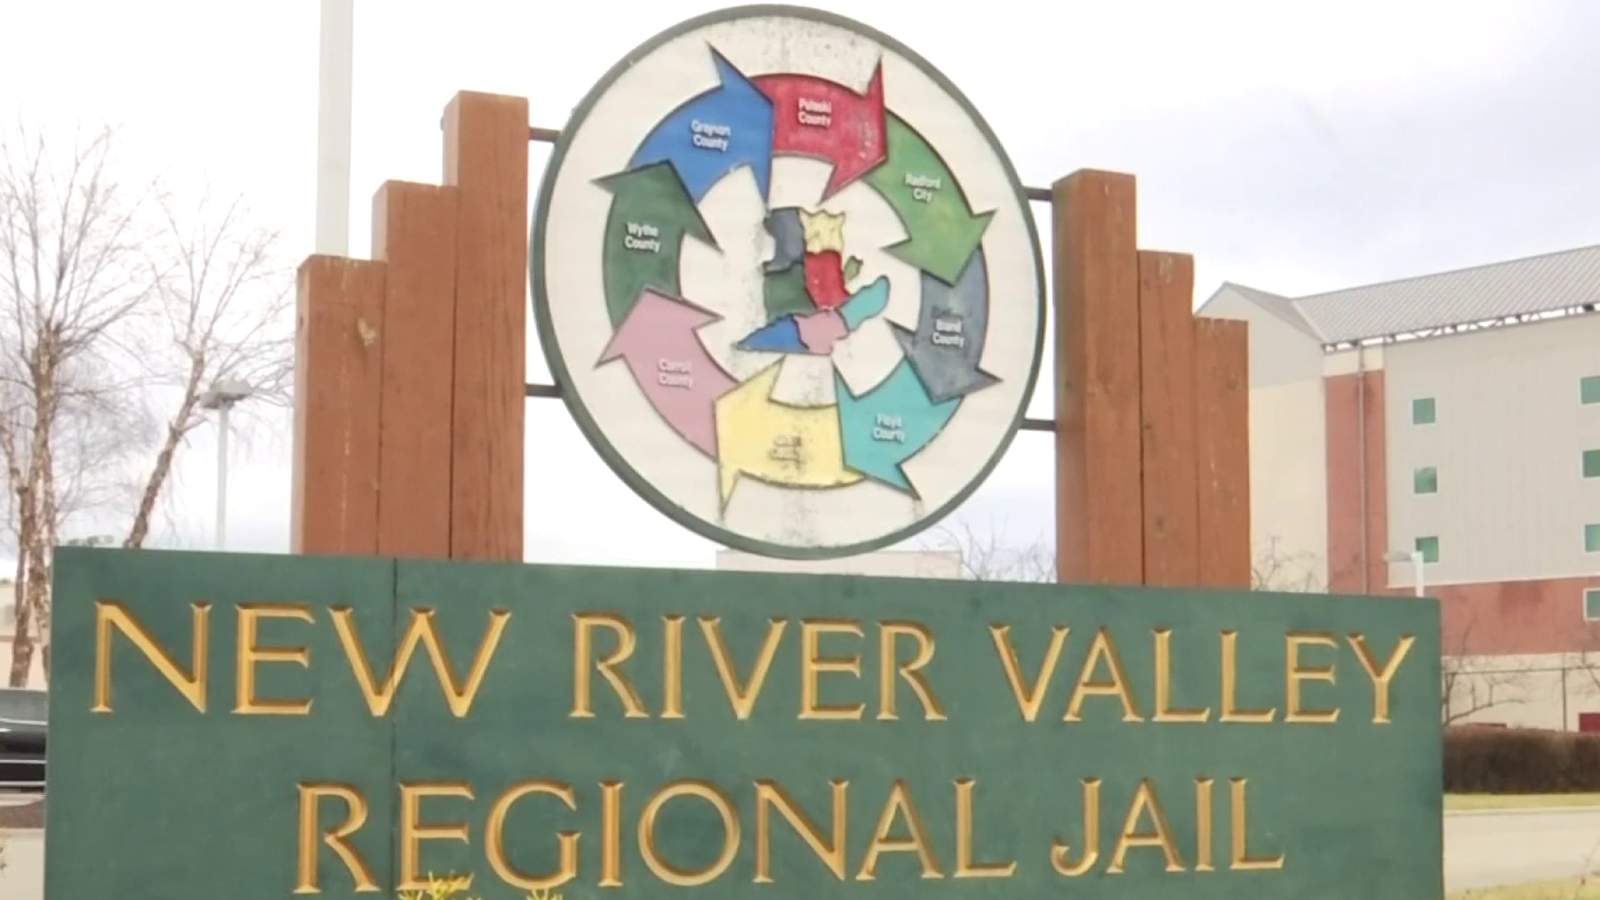 Nearly two dozen New River Valley Regional Jail inmates test positive for COVID-19